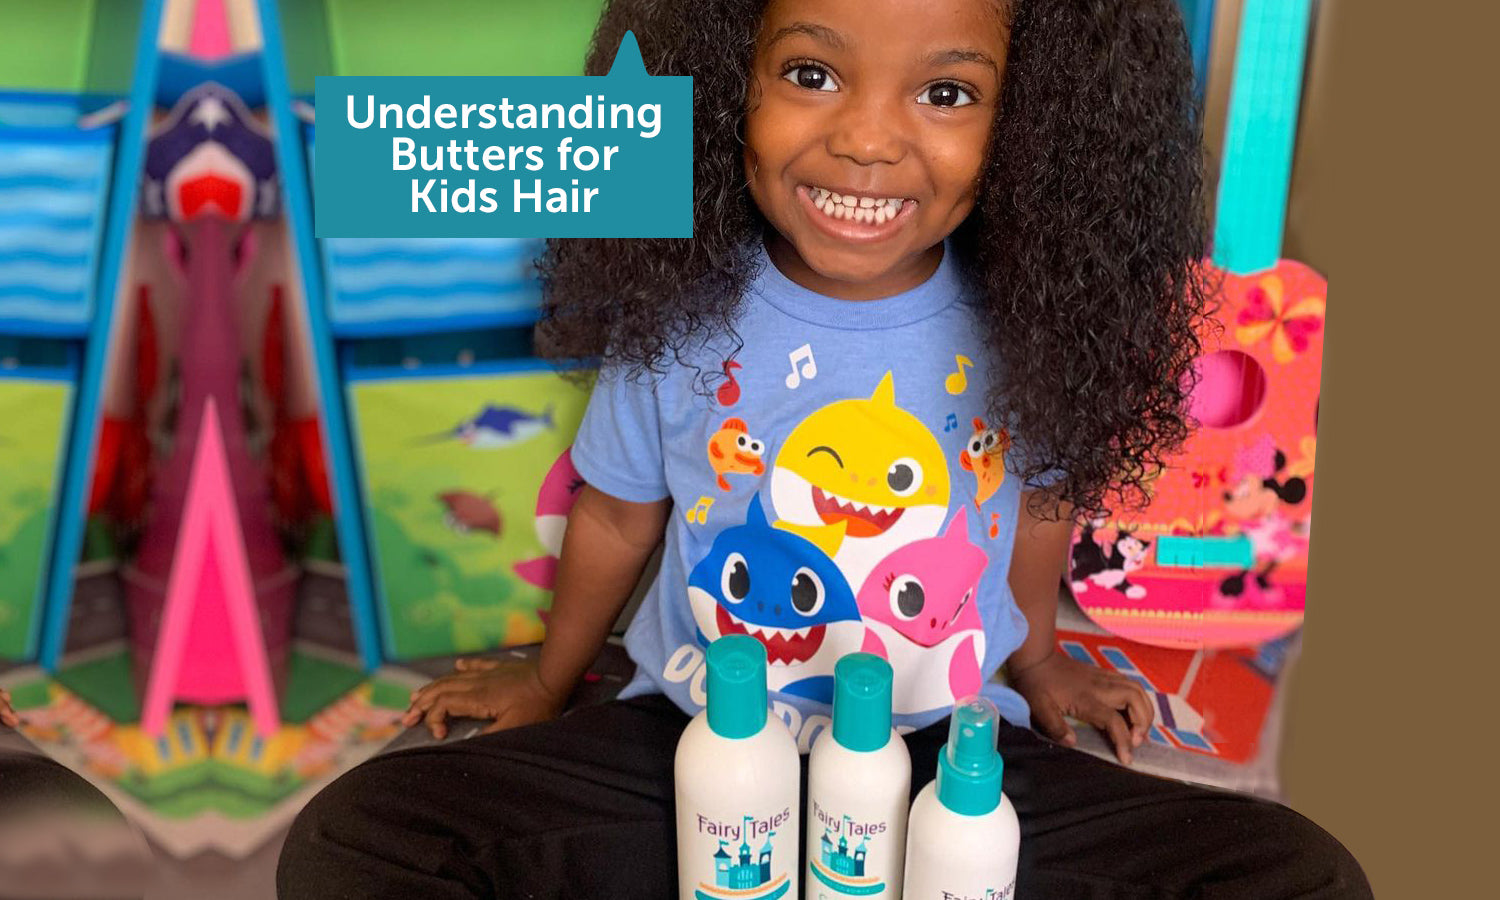 Hair Butters for Curly Kids - Here's What You Need to Know!